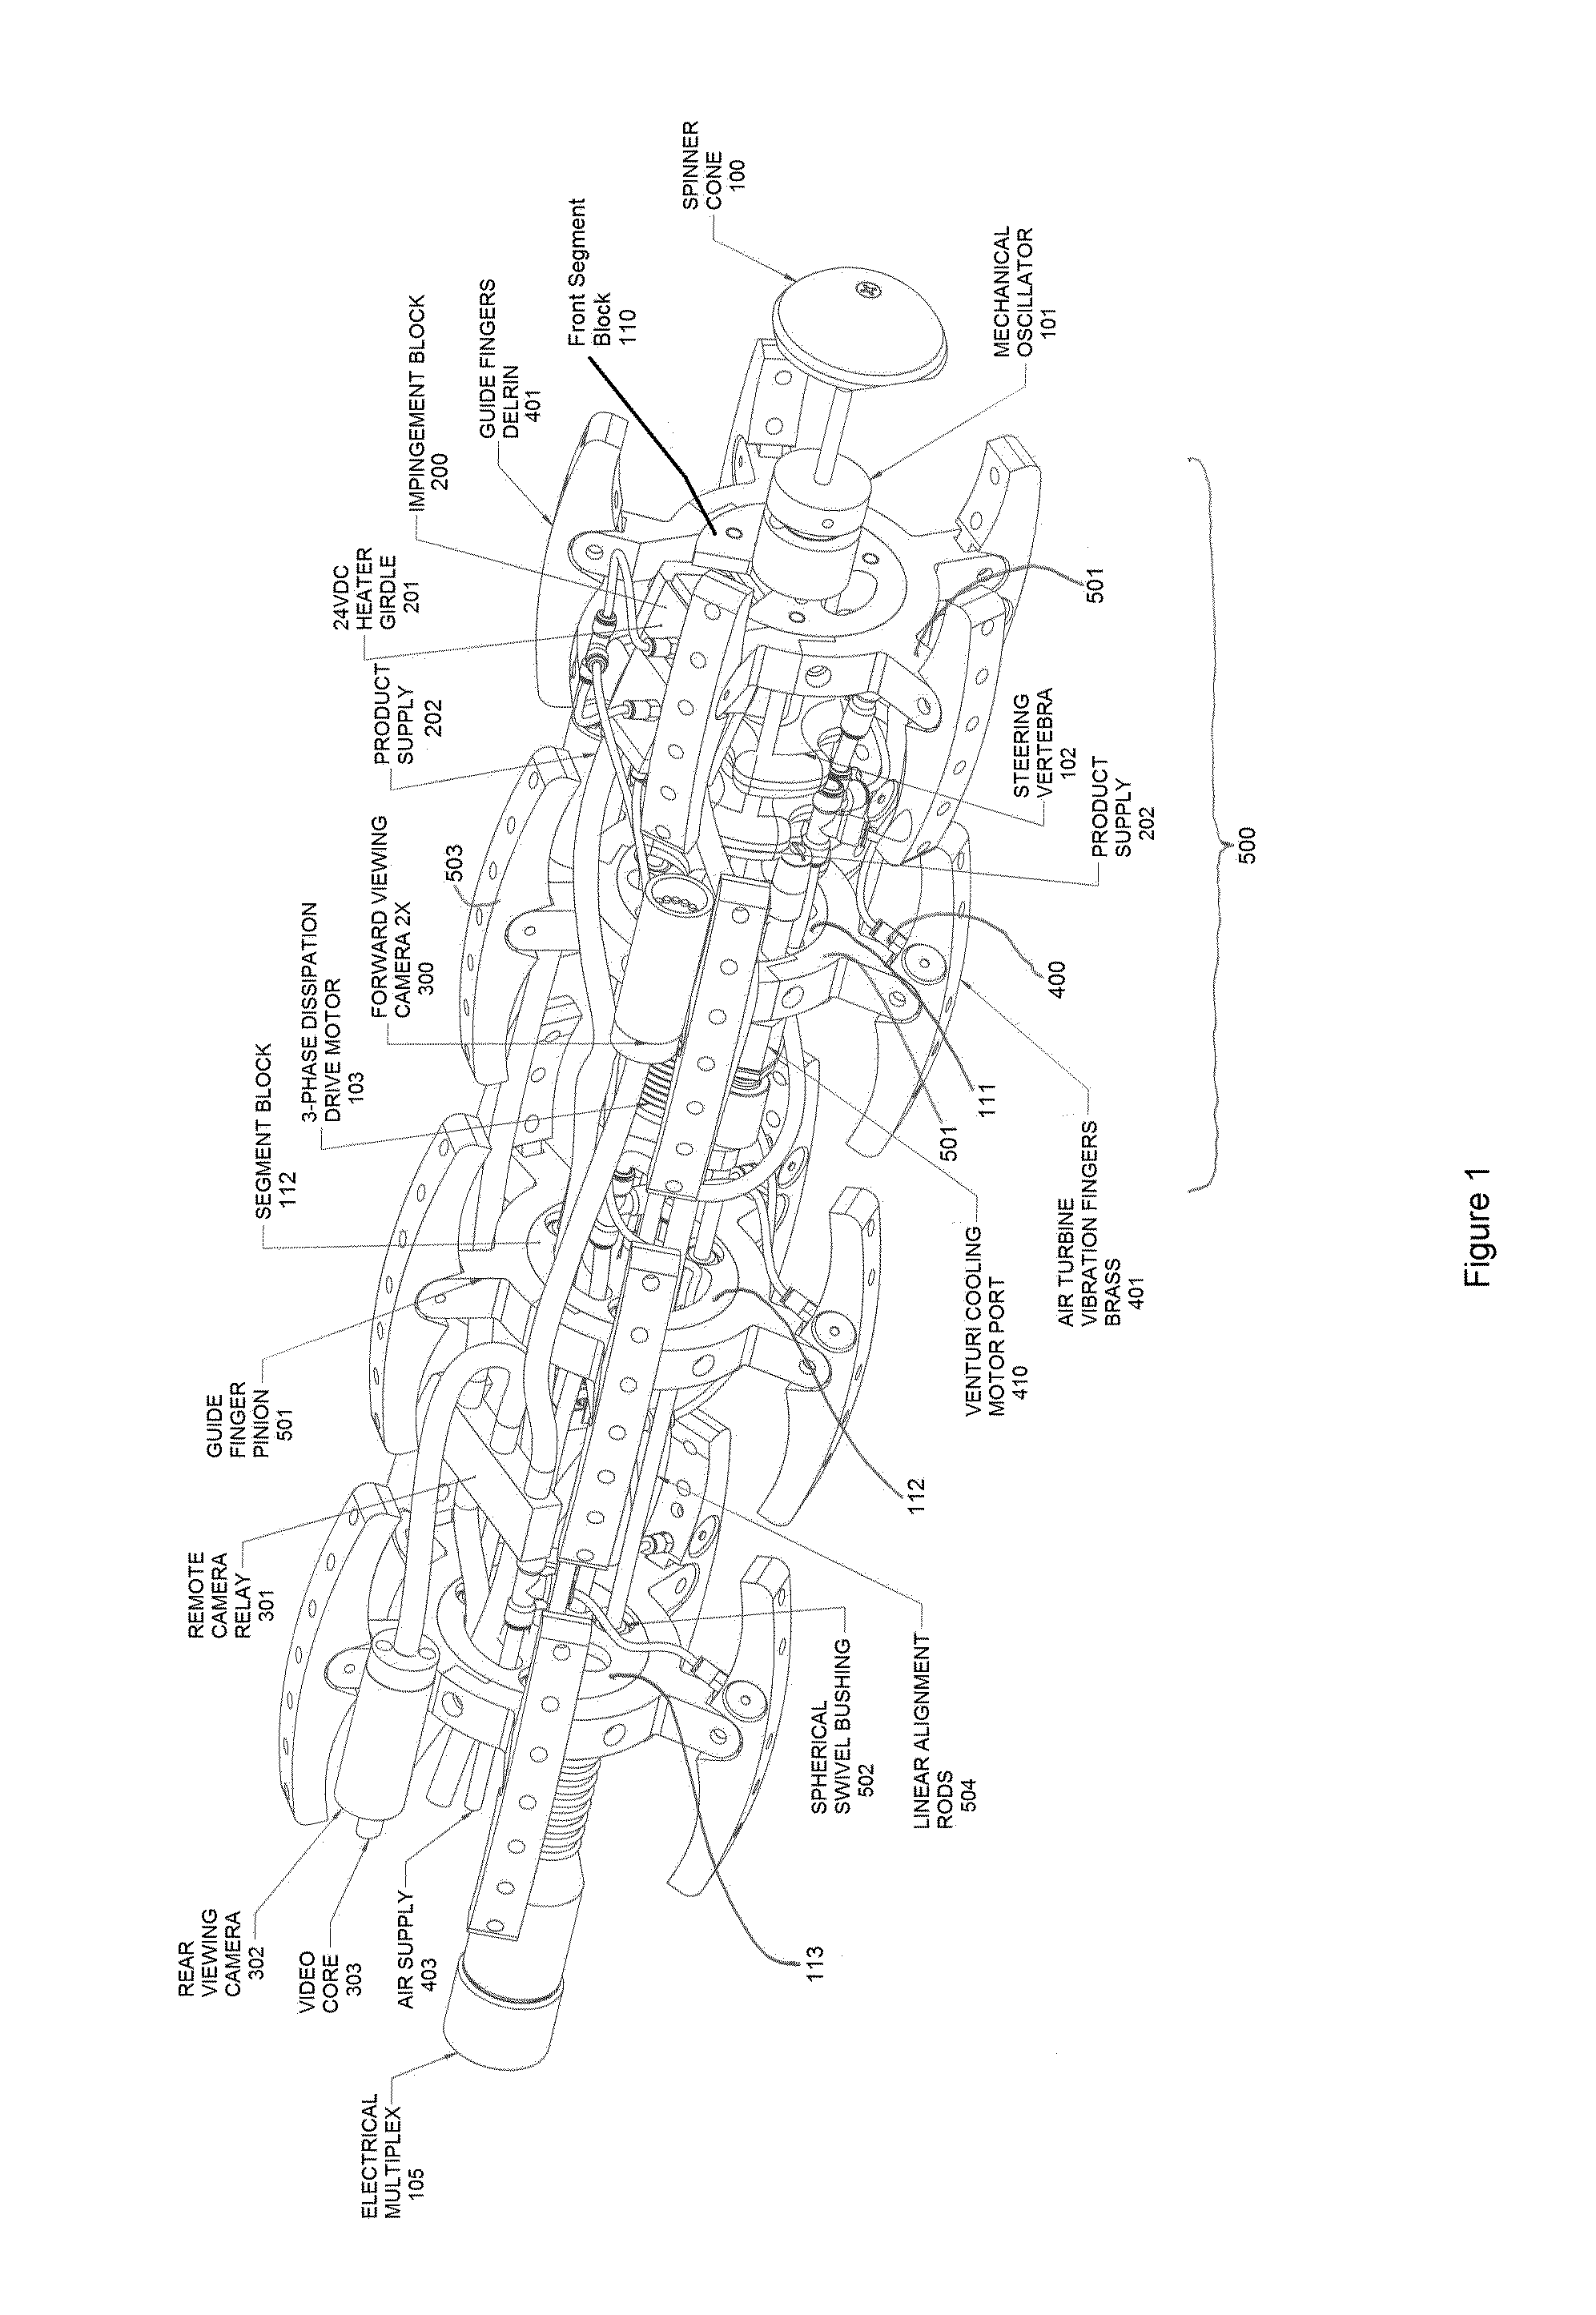 Multi-segmented apparatus for lining pipe with multiple convoluted bends and varied orientations with a structural membrane